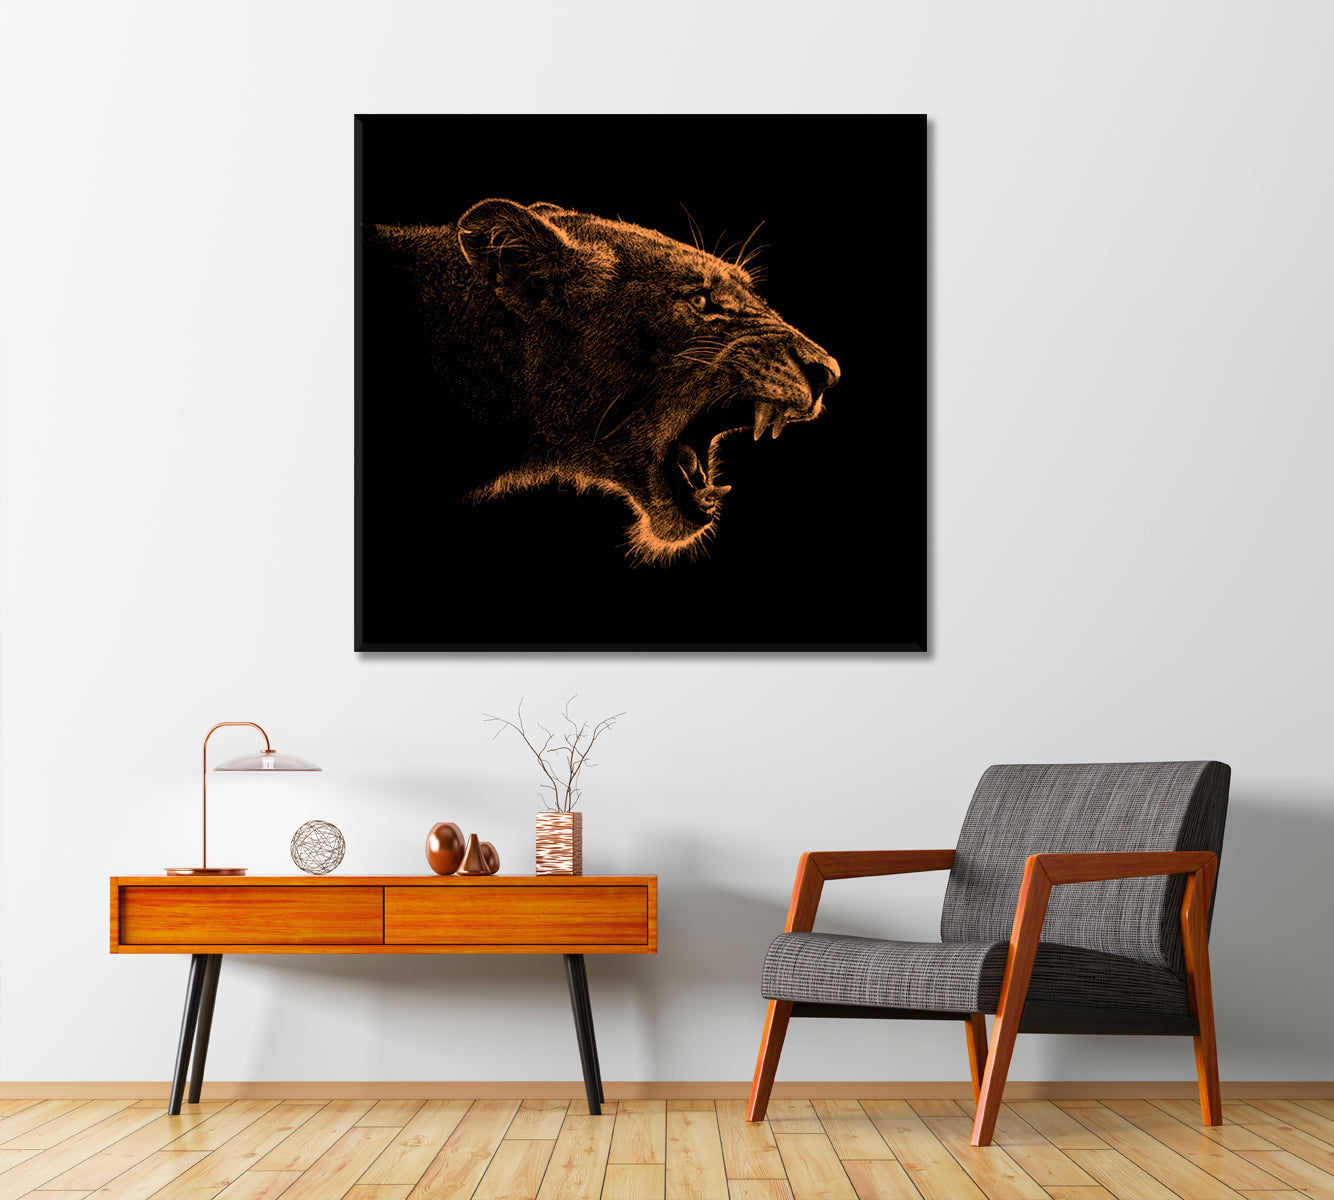 Graphic Sketch Angry Lion Canvas Print-Canvas Print-CetArt-1 panel-12x12 inches-CetArt